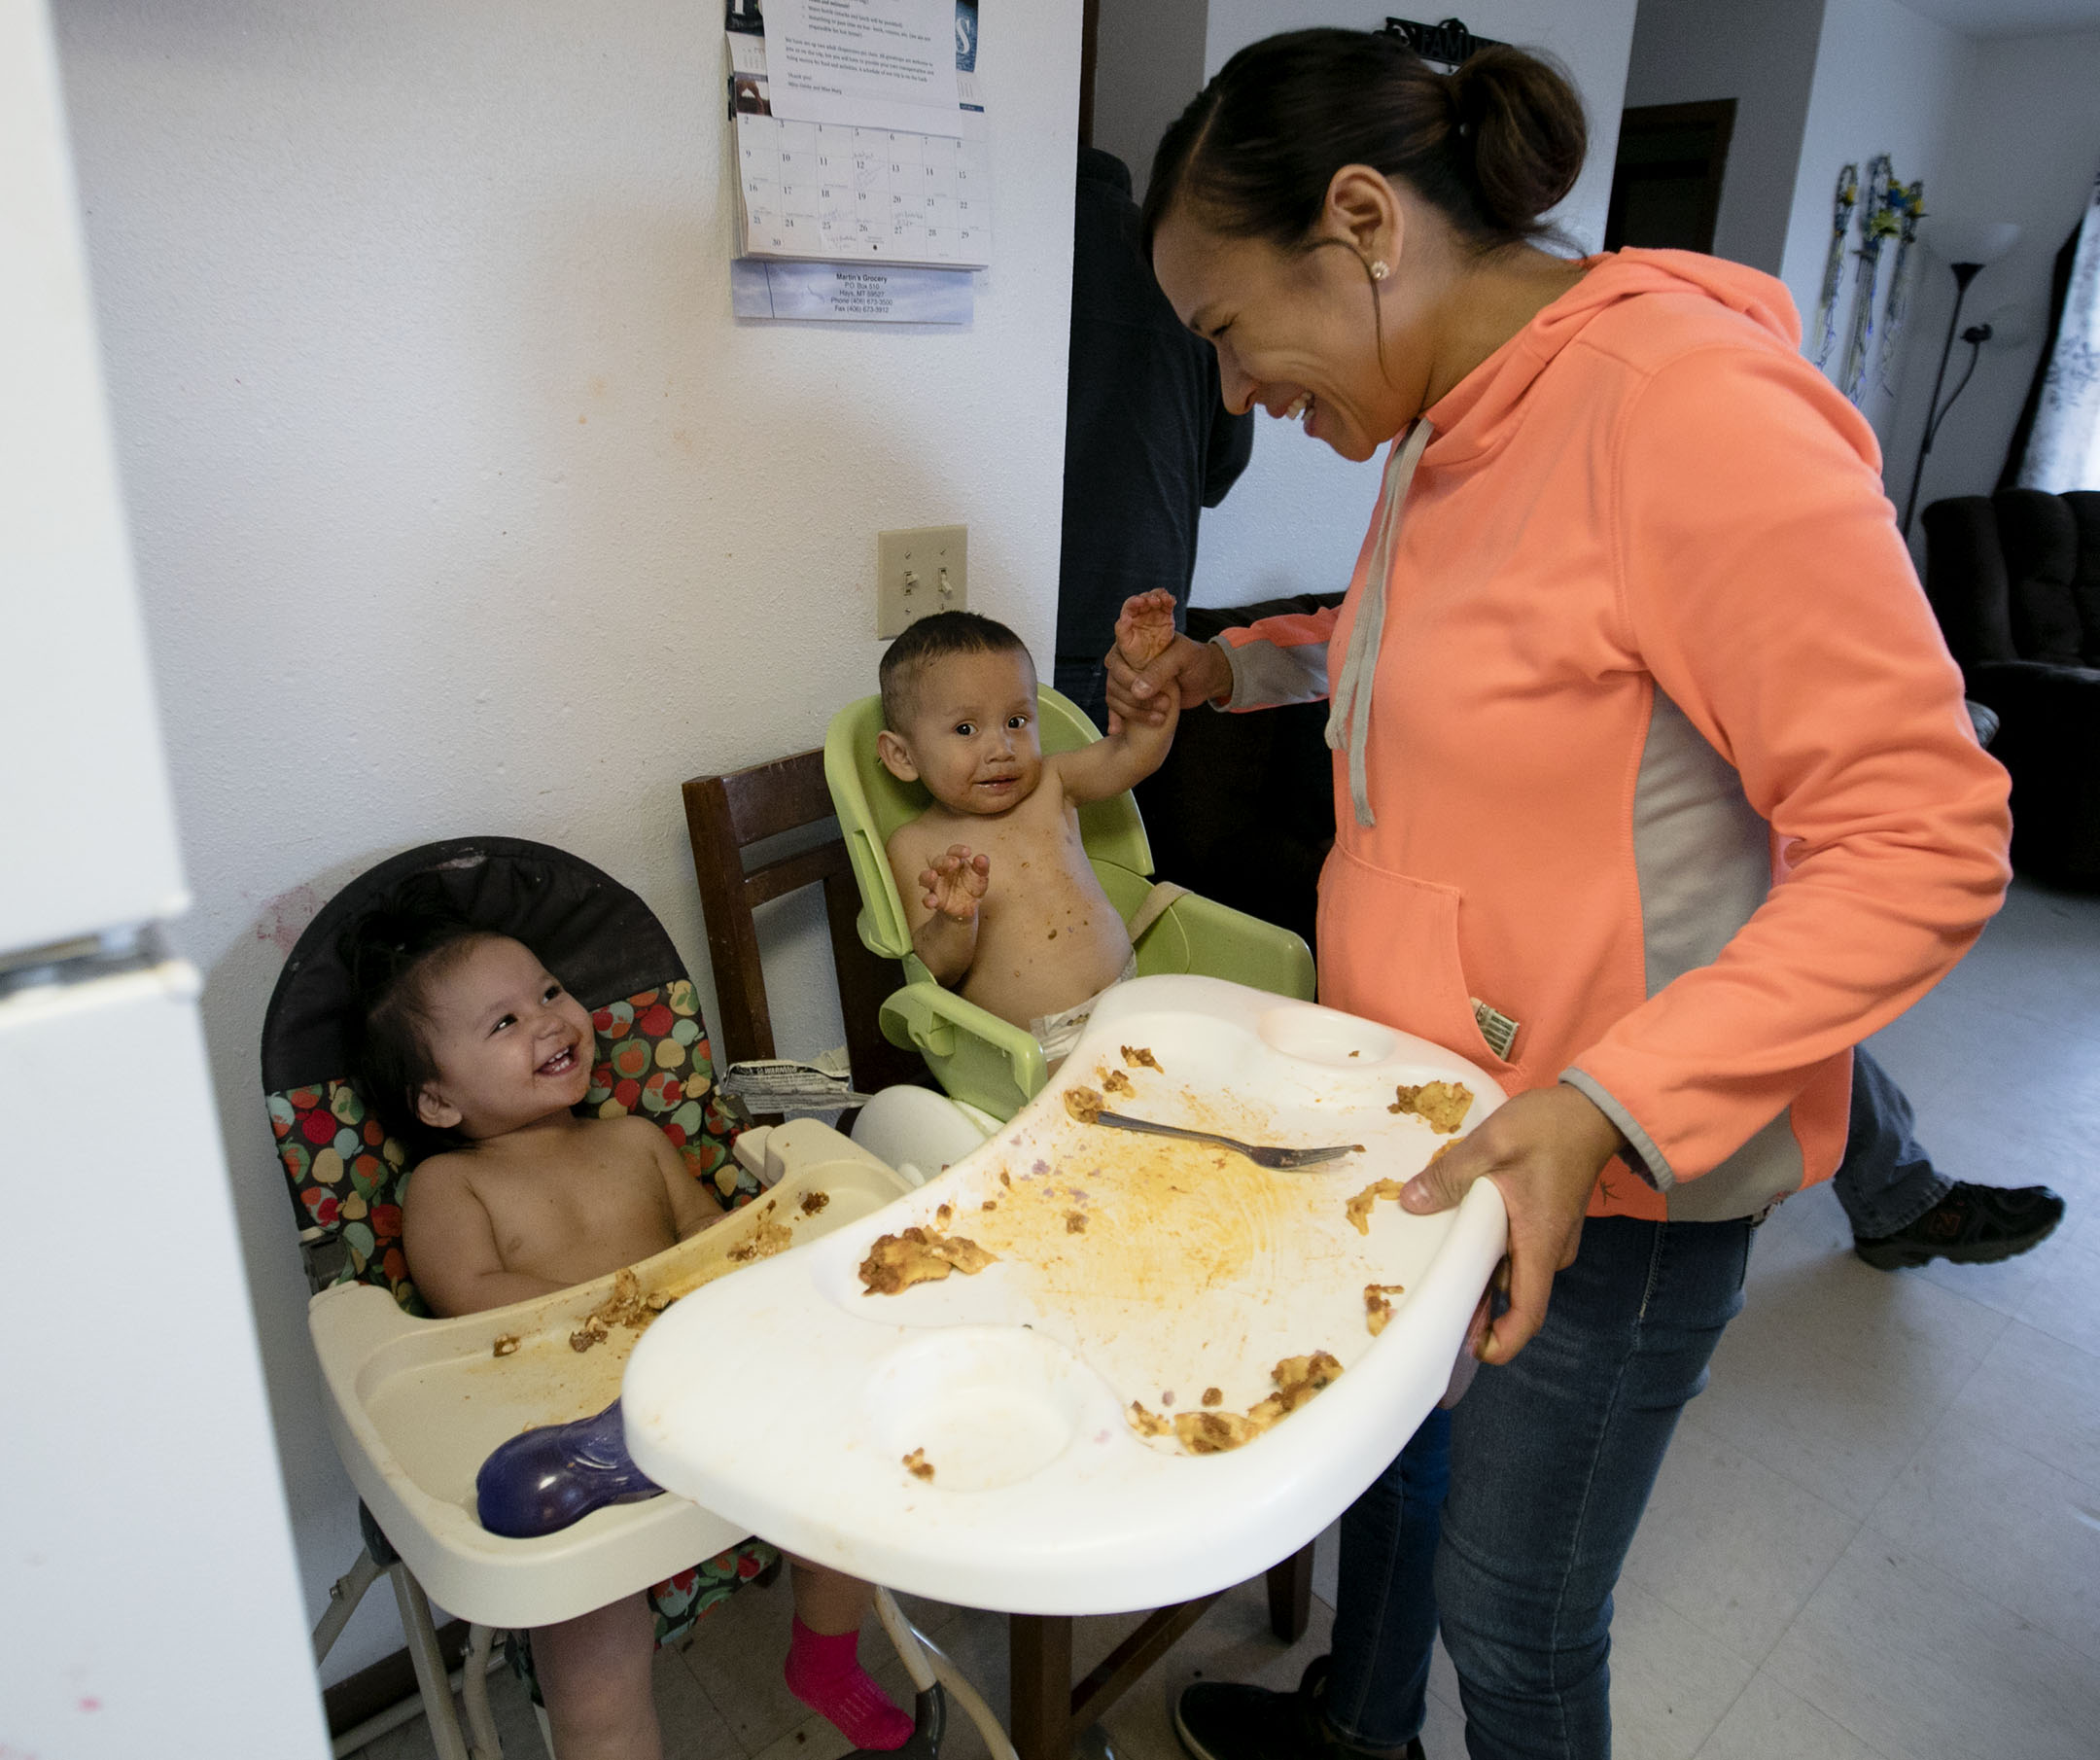 Jean Bear feeds her children, Hazel and Kale, while celebrating her 30th birthday at her home in Hays. Her pregnancy with the twins was considered high risk and she was able to sign up for Medicaid to help cover the costs of care.